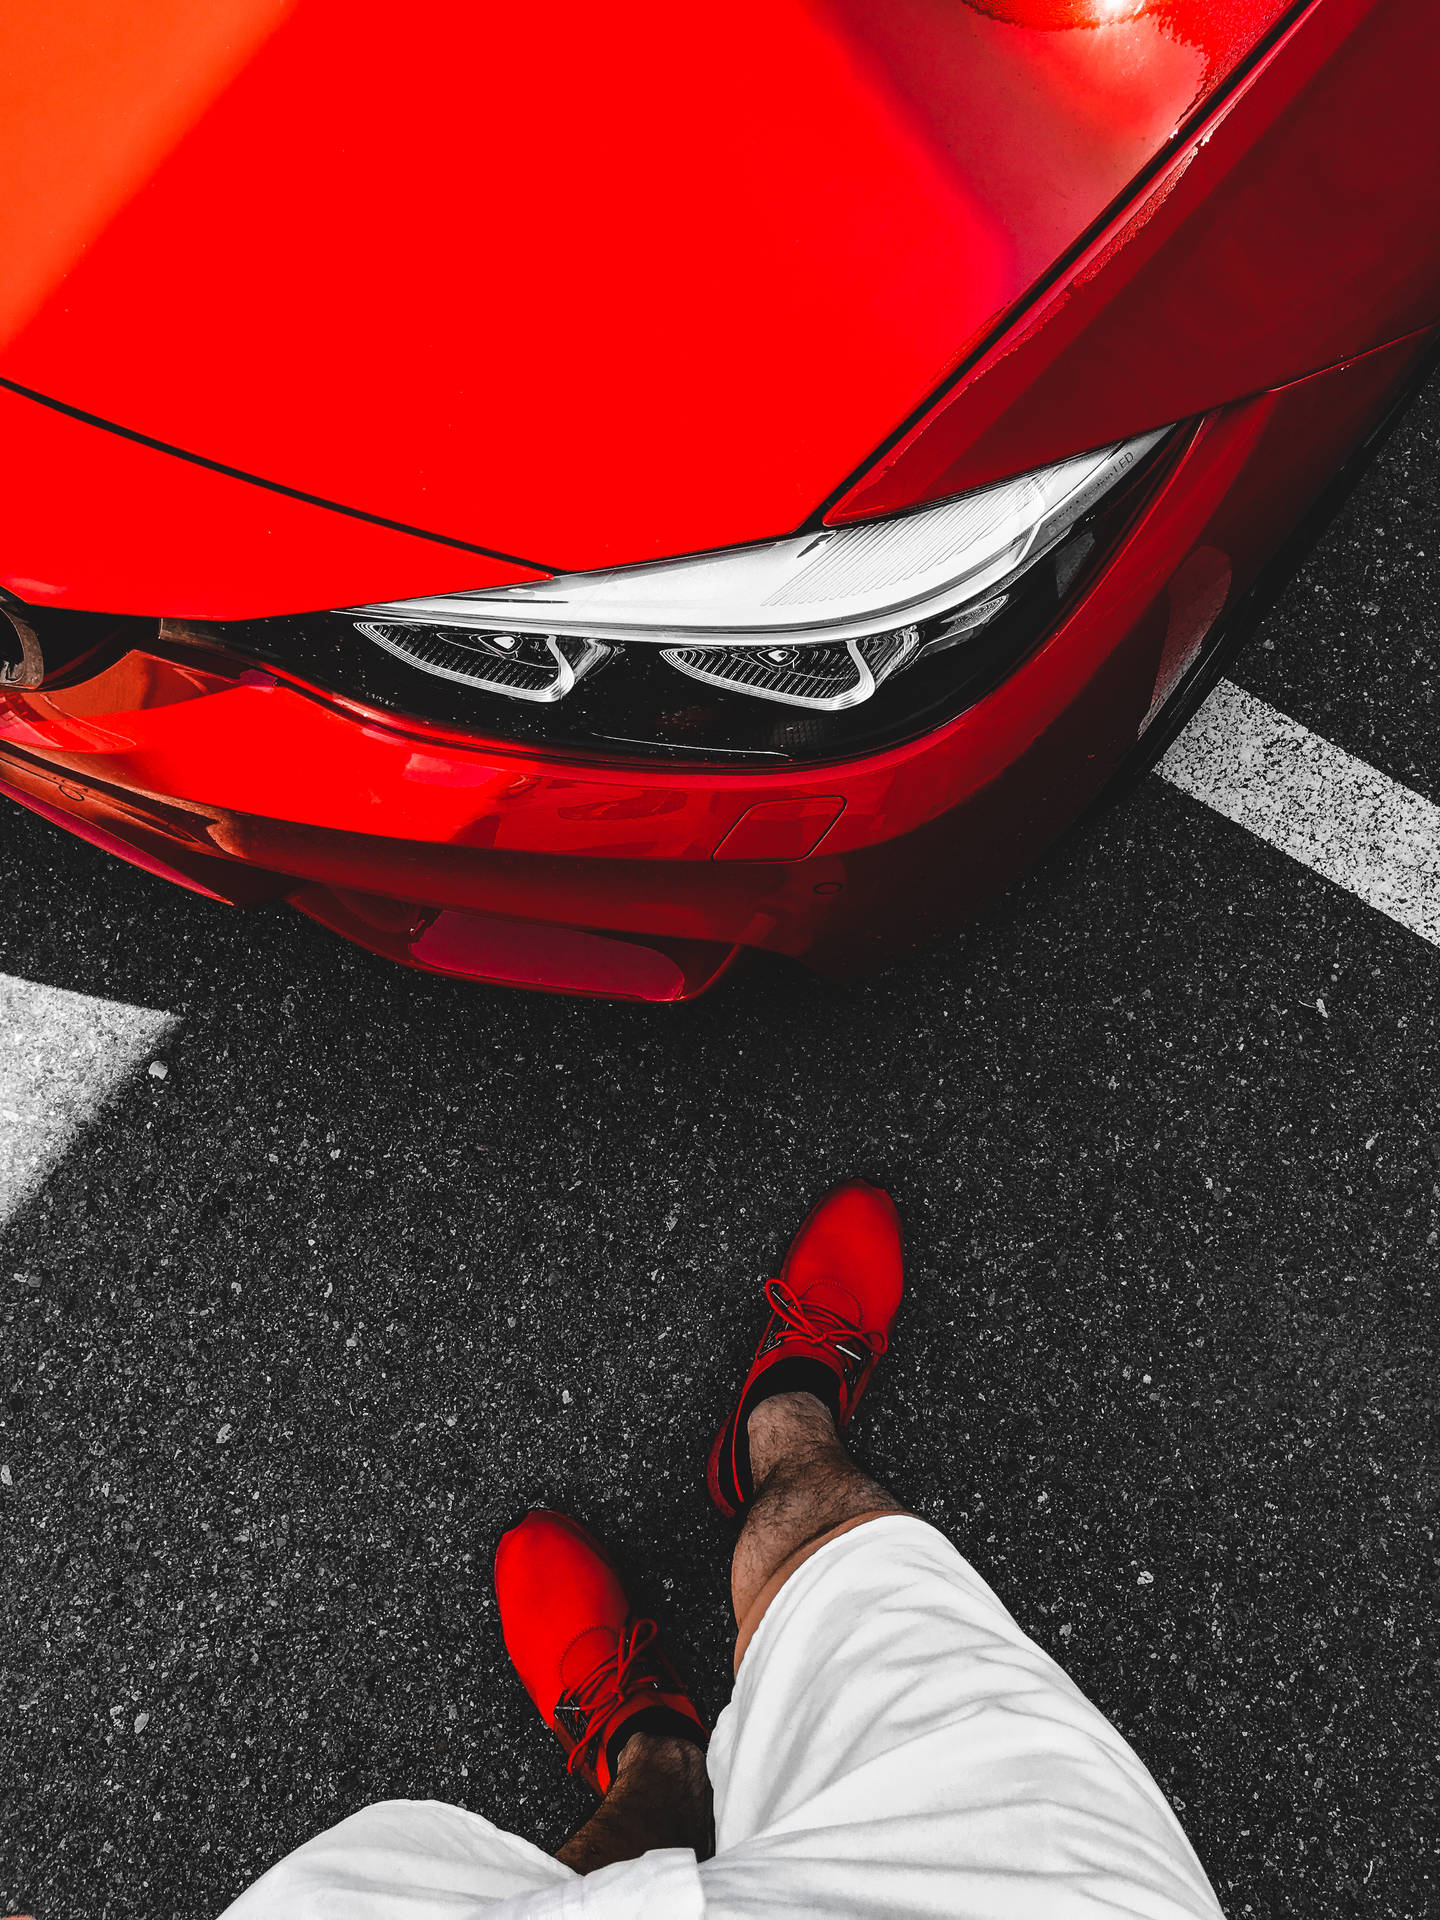 Iphone 8 Red Shoes And Car Background